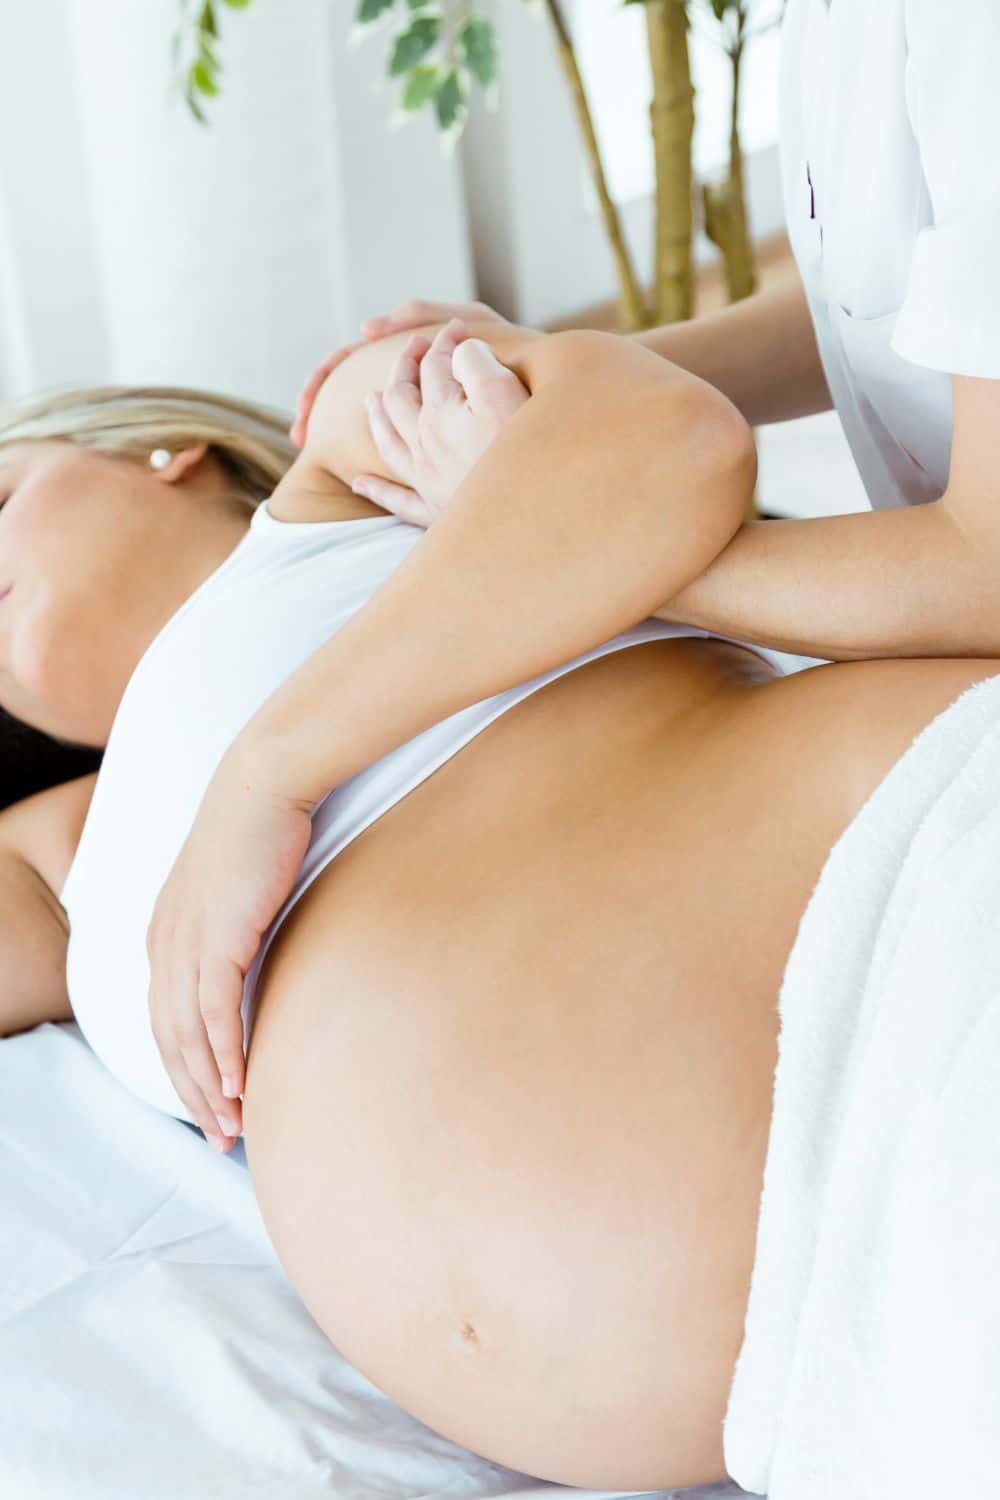 fun activities to do while pregnant - pregnancy massage